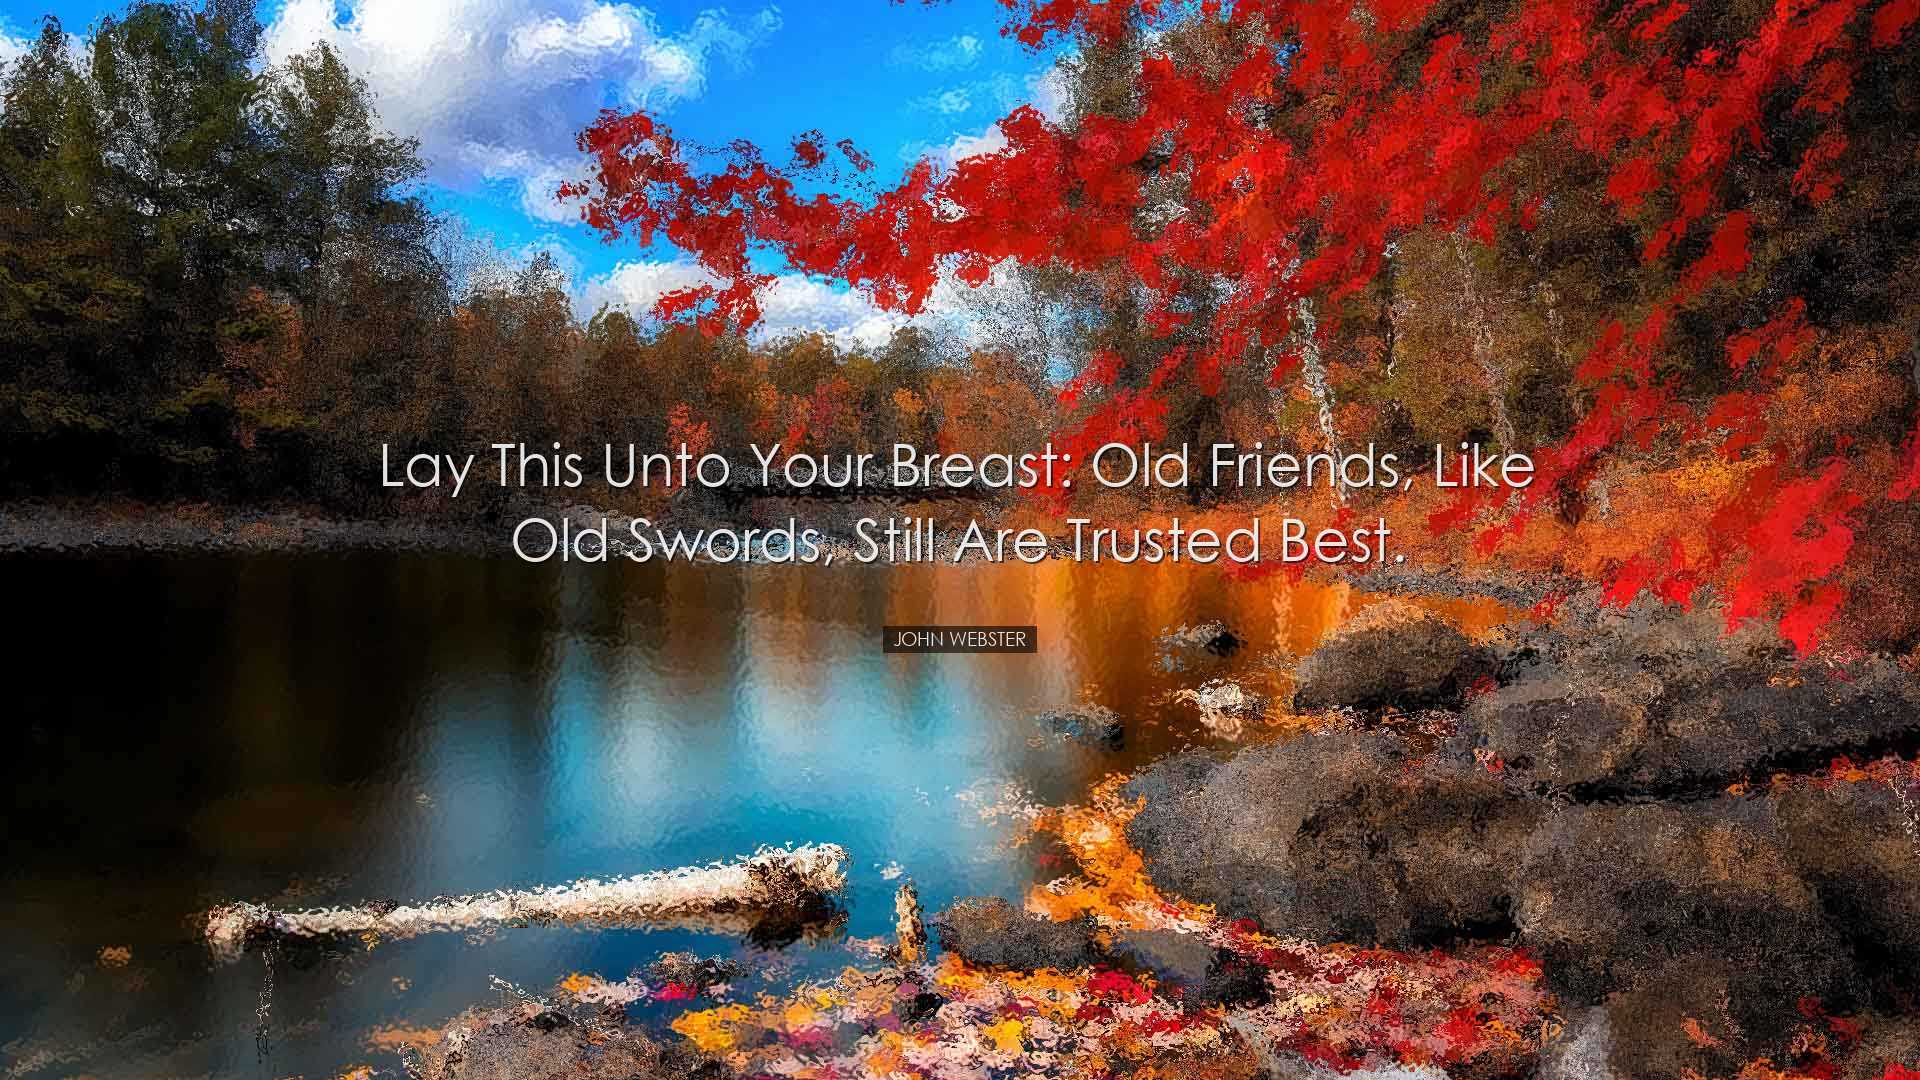 Lay this unto your breast: Old friends, like old swords, still are